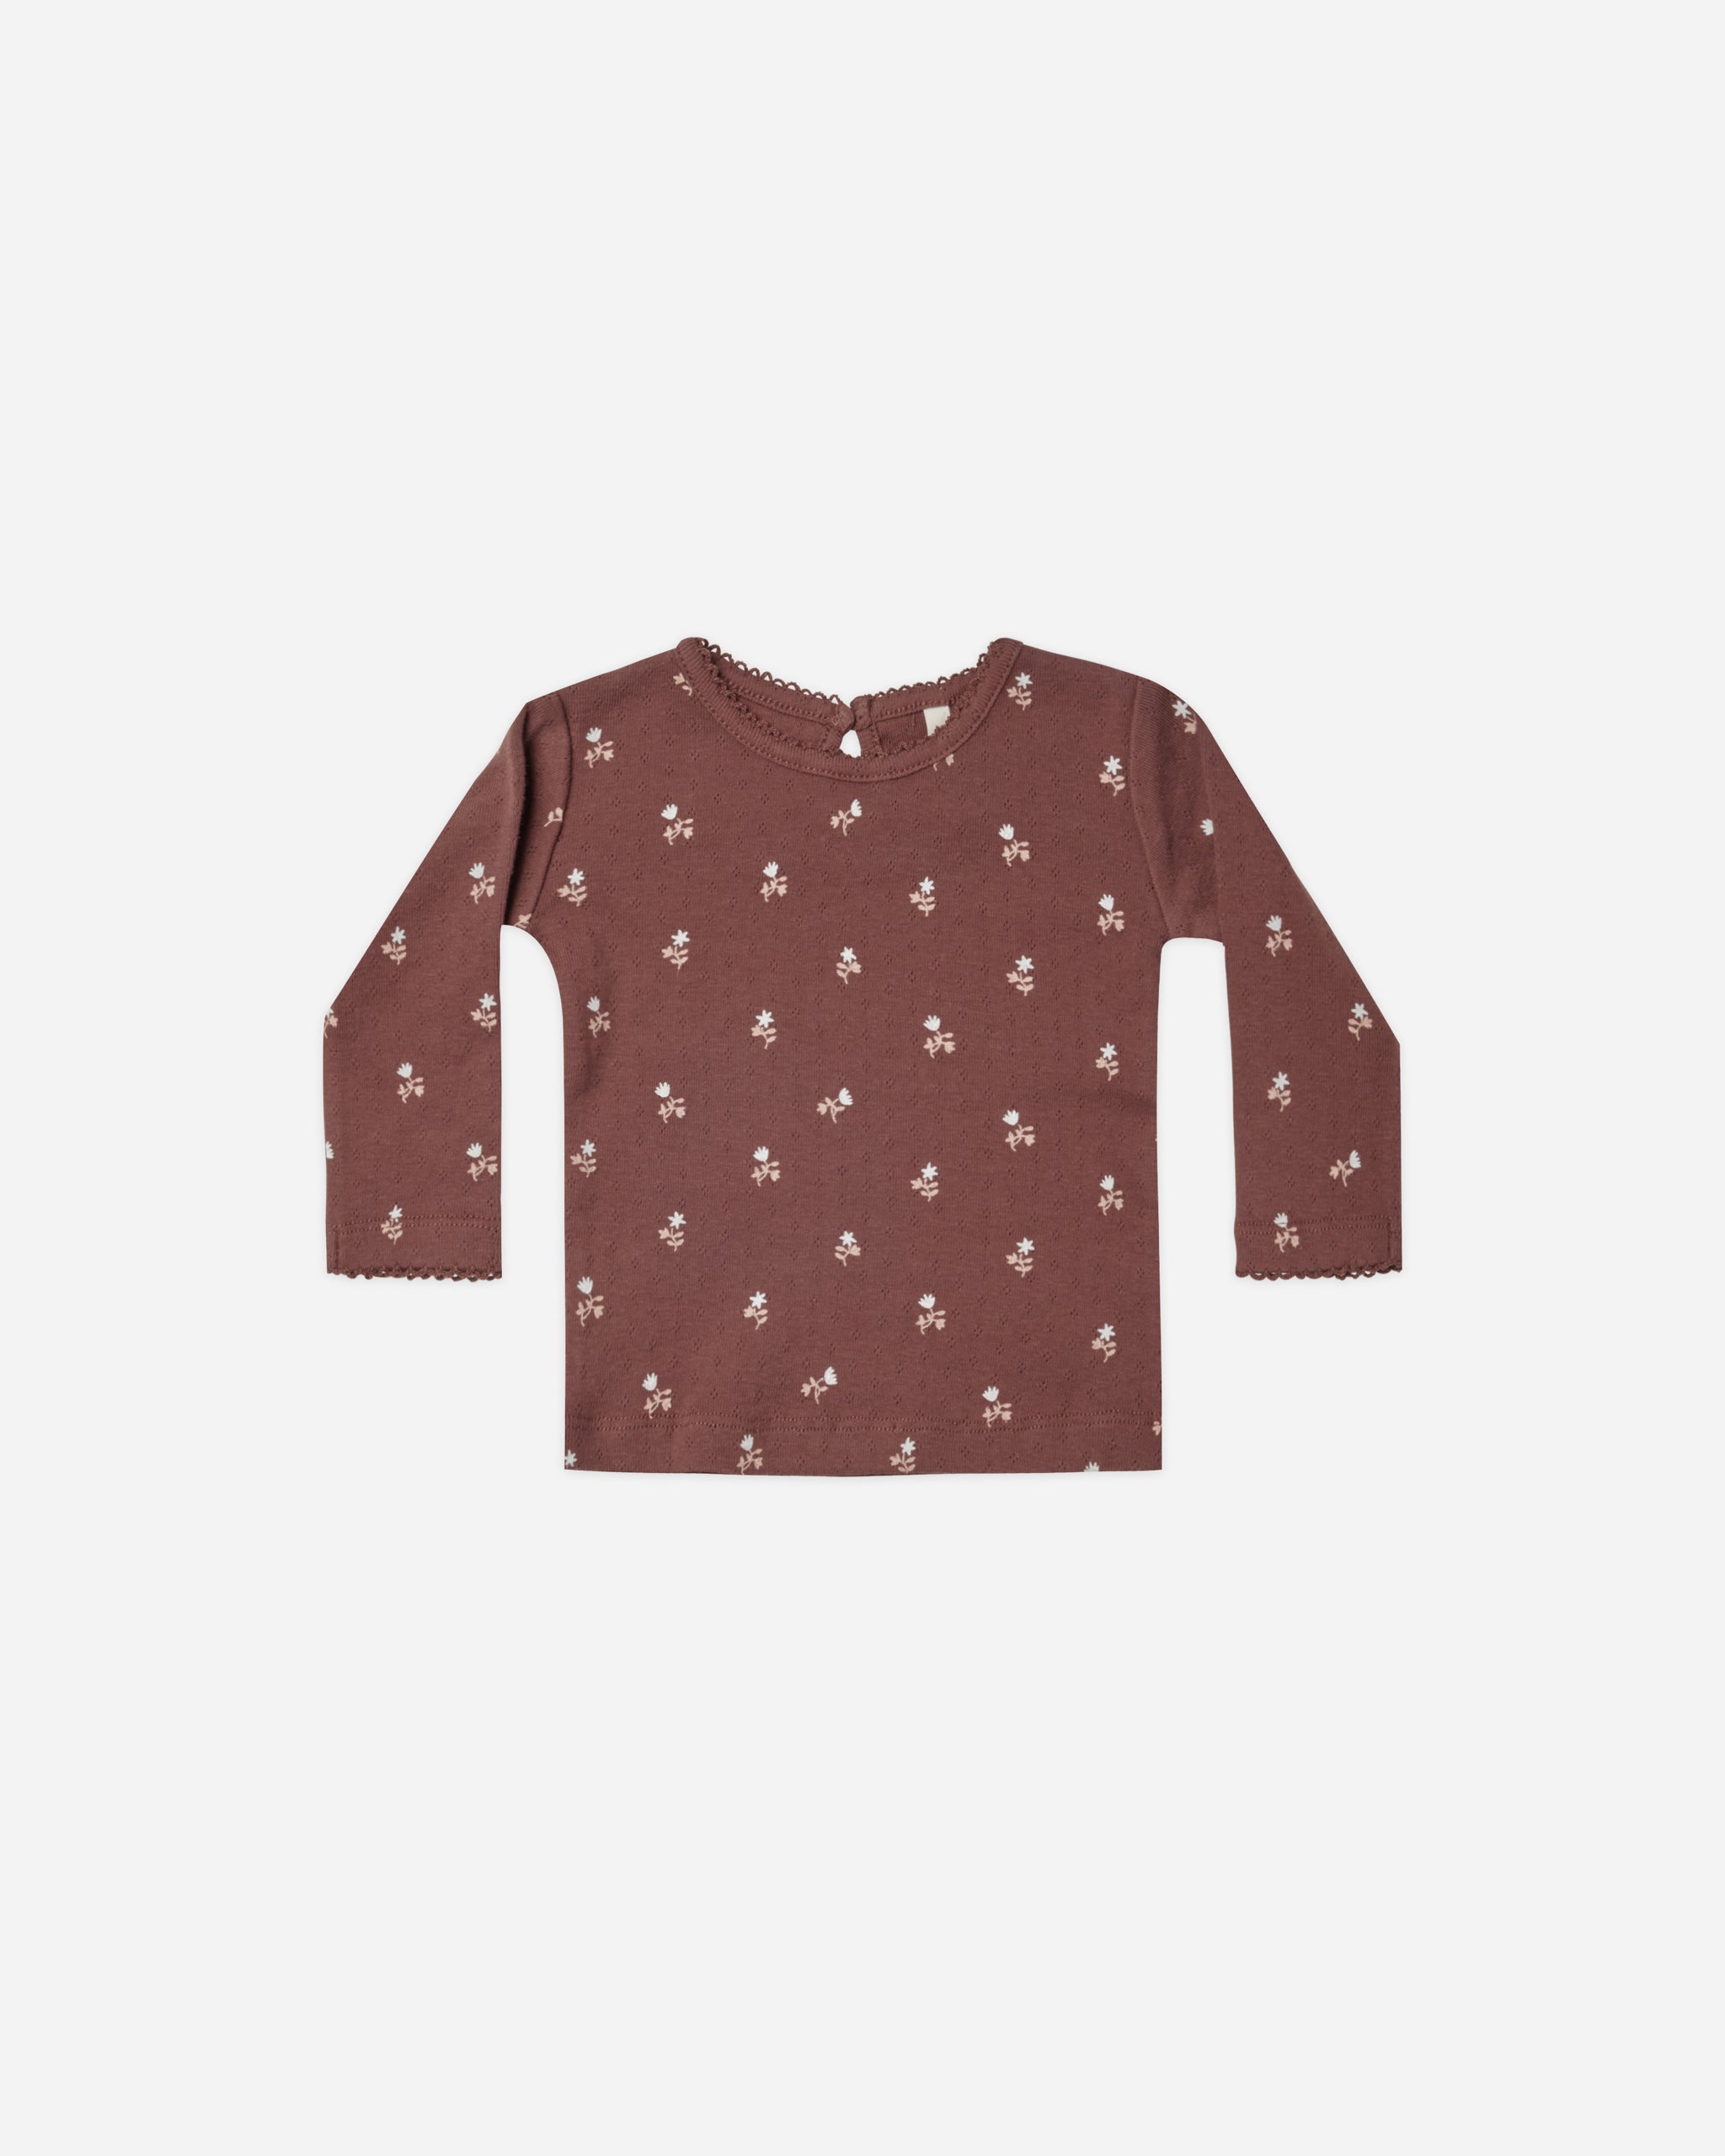 Pointelle Long Sleeve Tee || Plum Fleur - Rylee + Cru | Kids Clothes | Trendy Baby Clothes | Modern Infant Outfits |